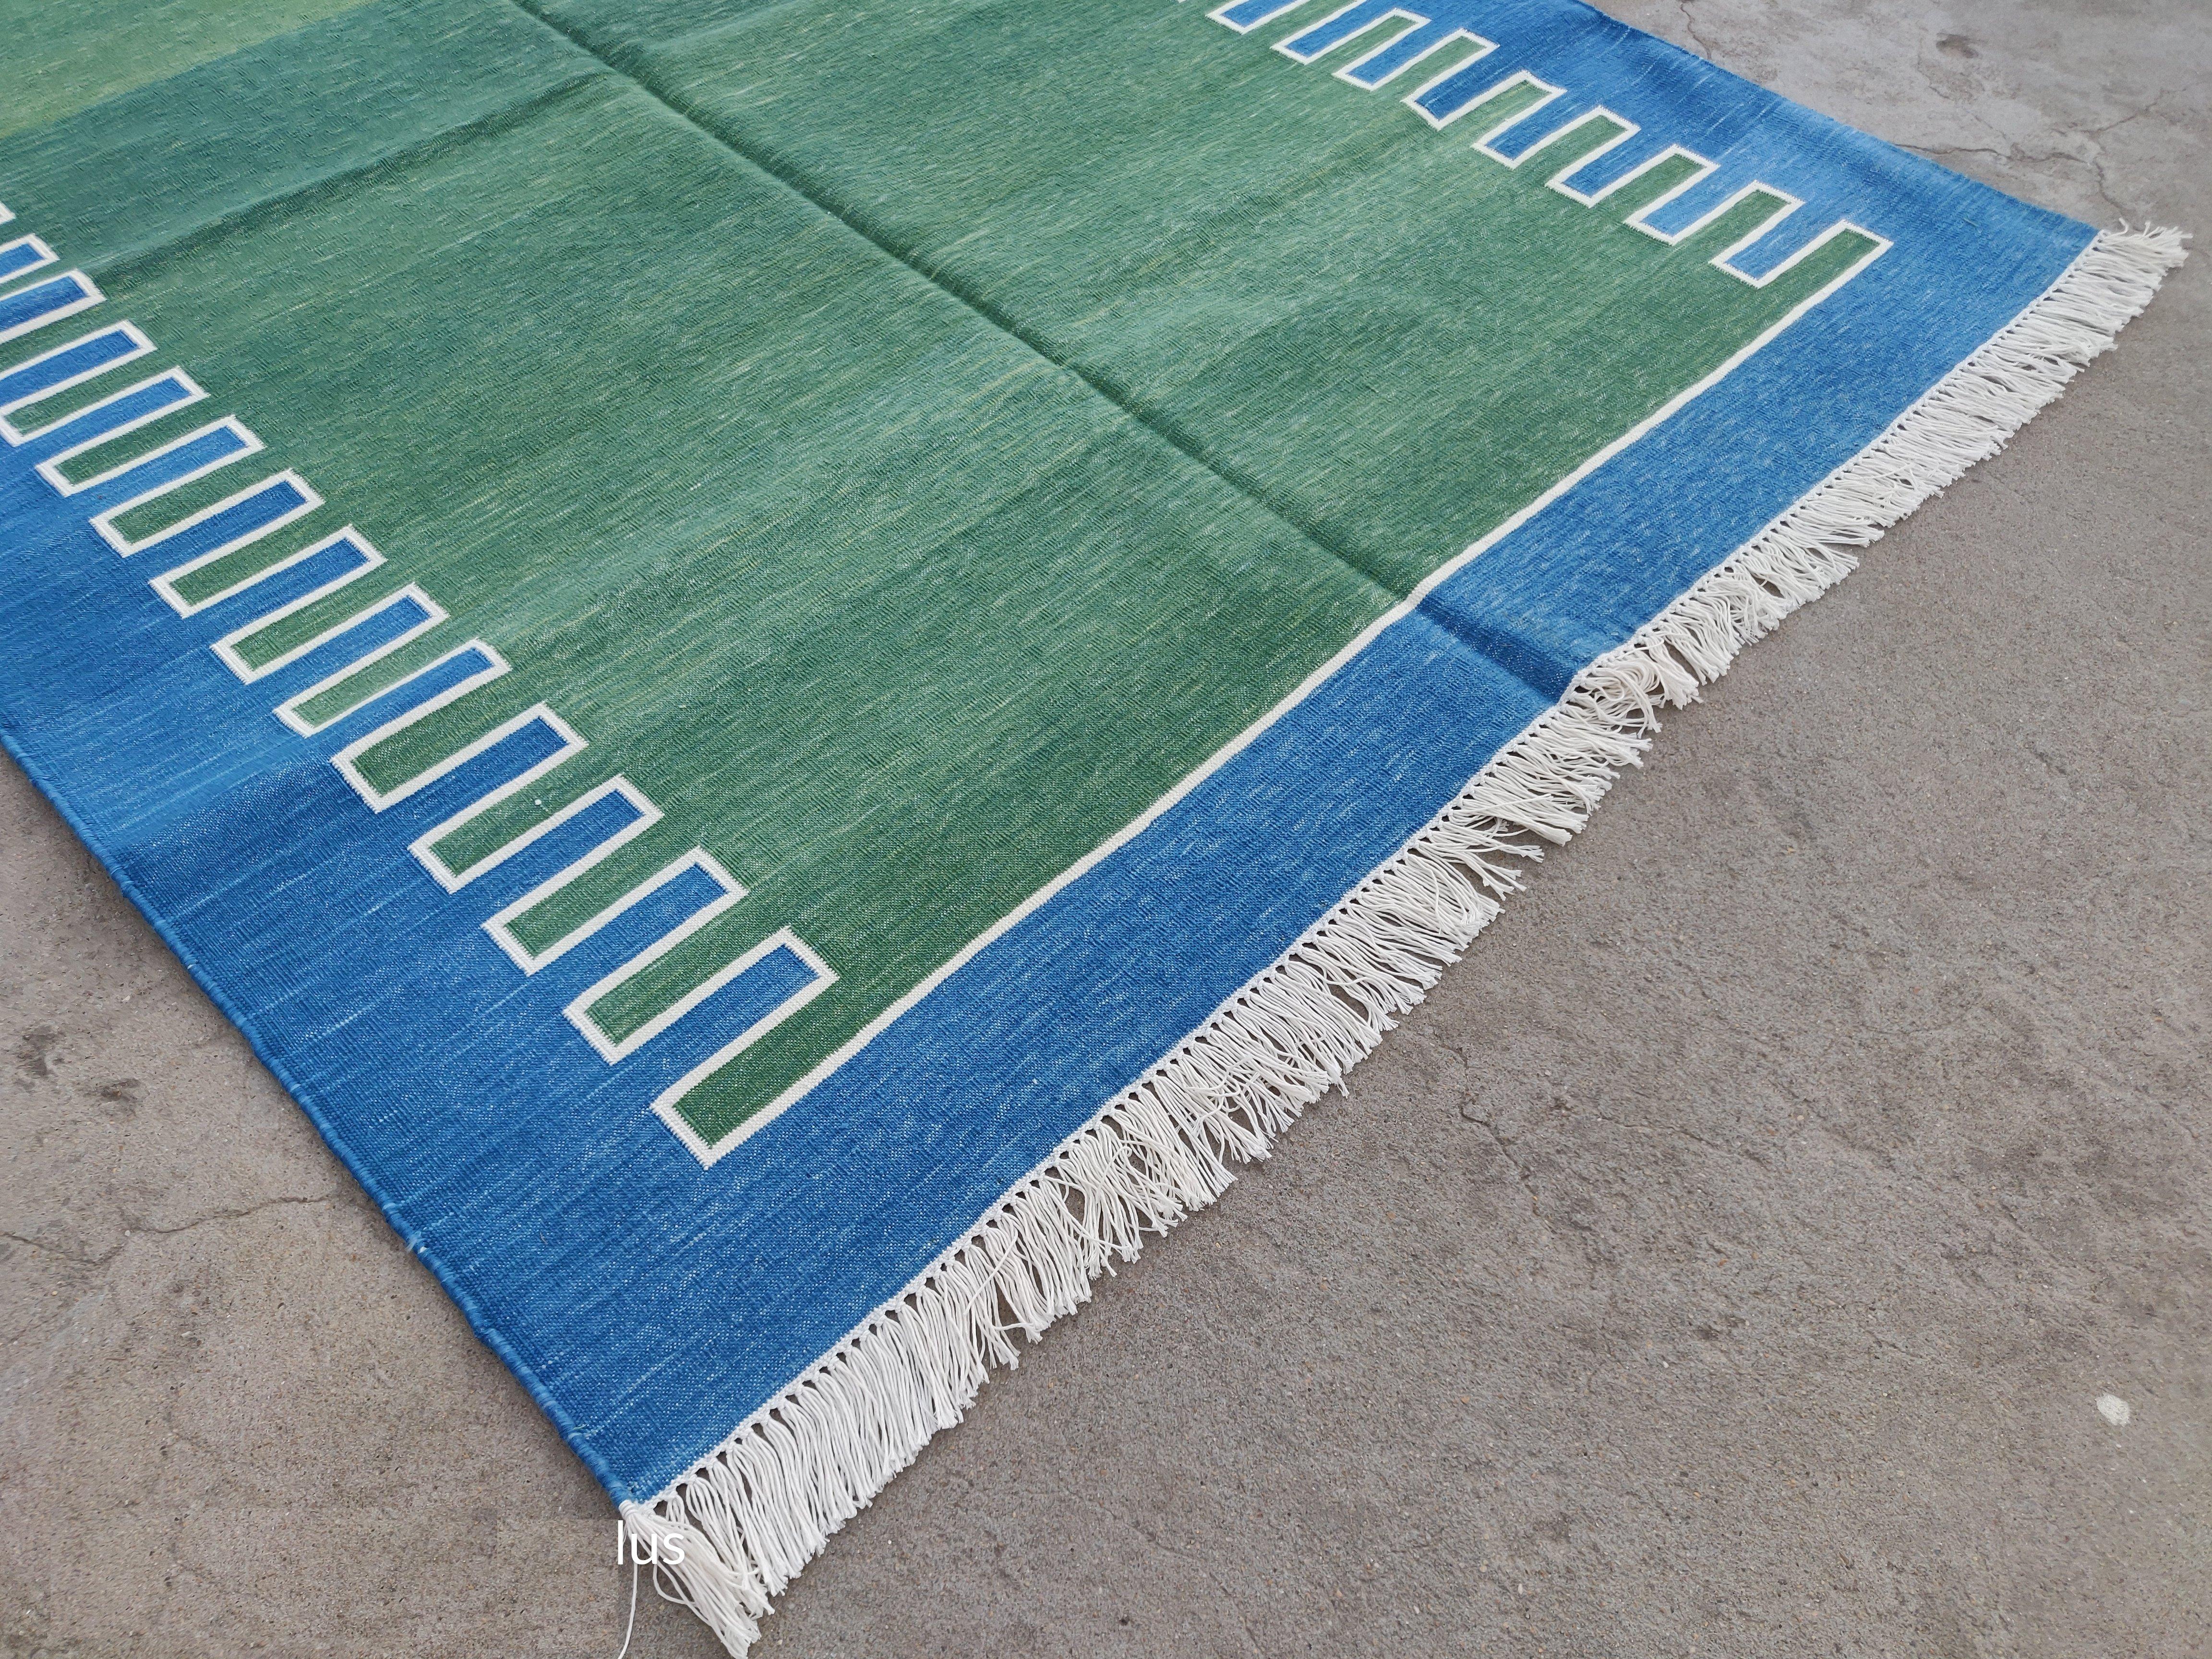 Mid-Century Modern Handmade Cotton Area Flat Weave Rug, 4x6 Green And Blue Striped Indian Dhurrie For Sale